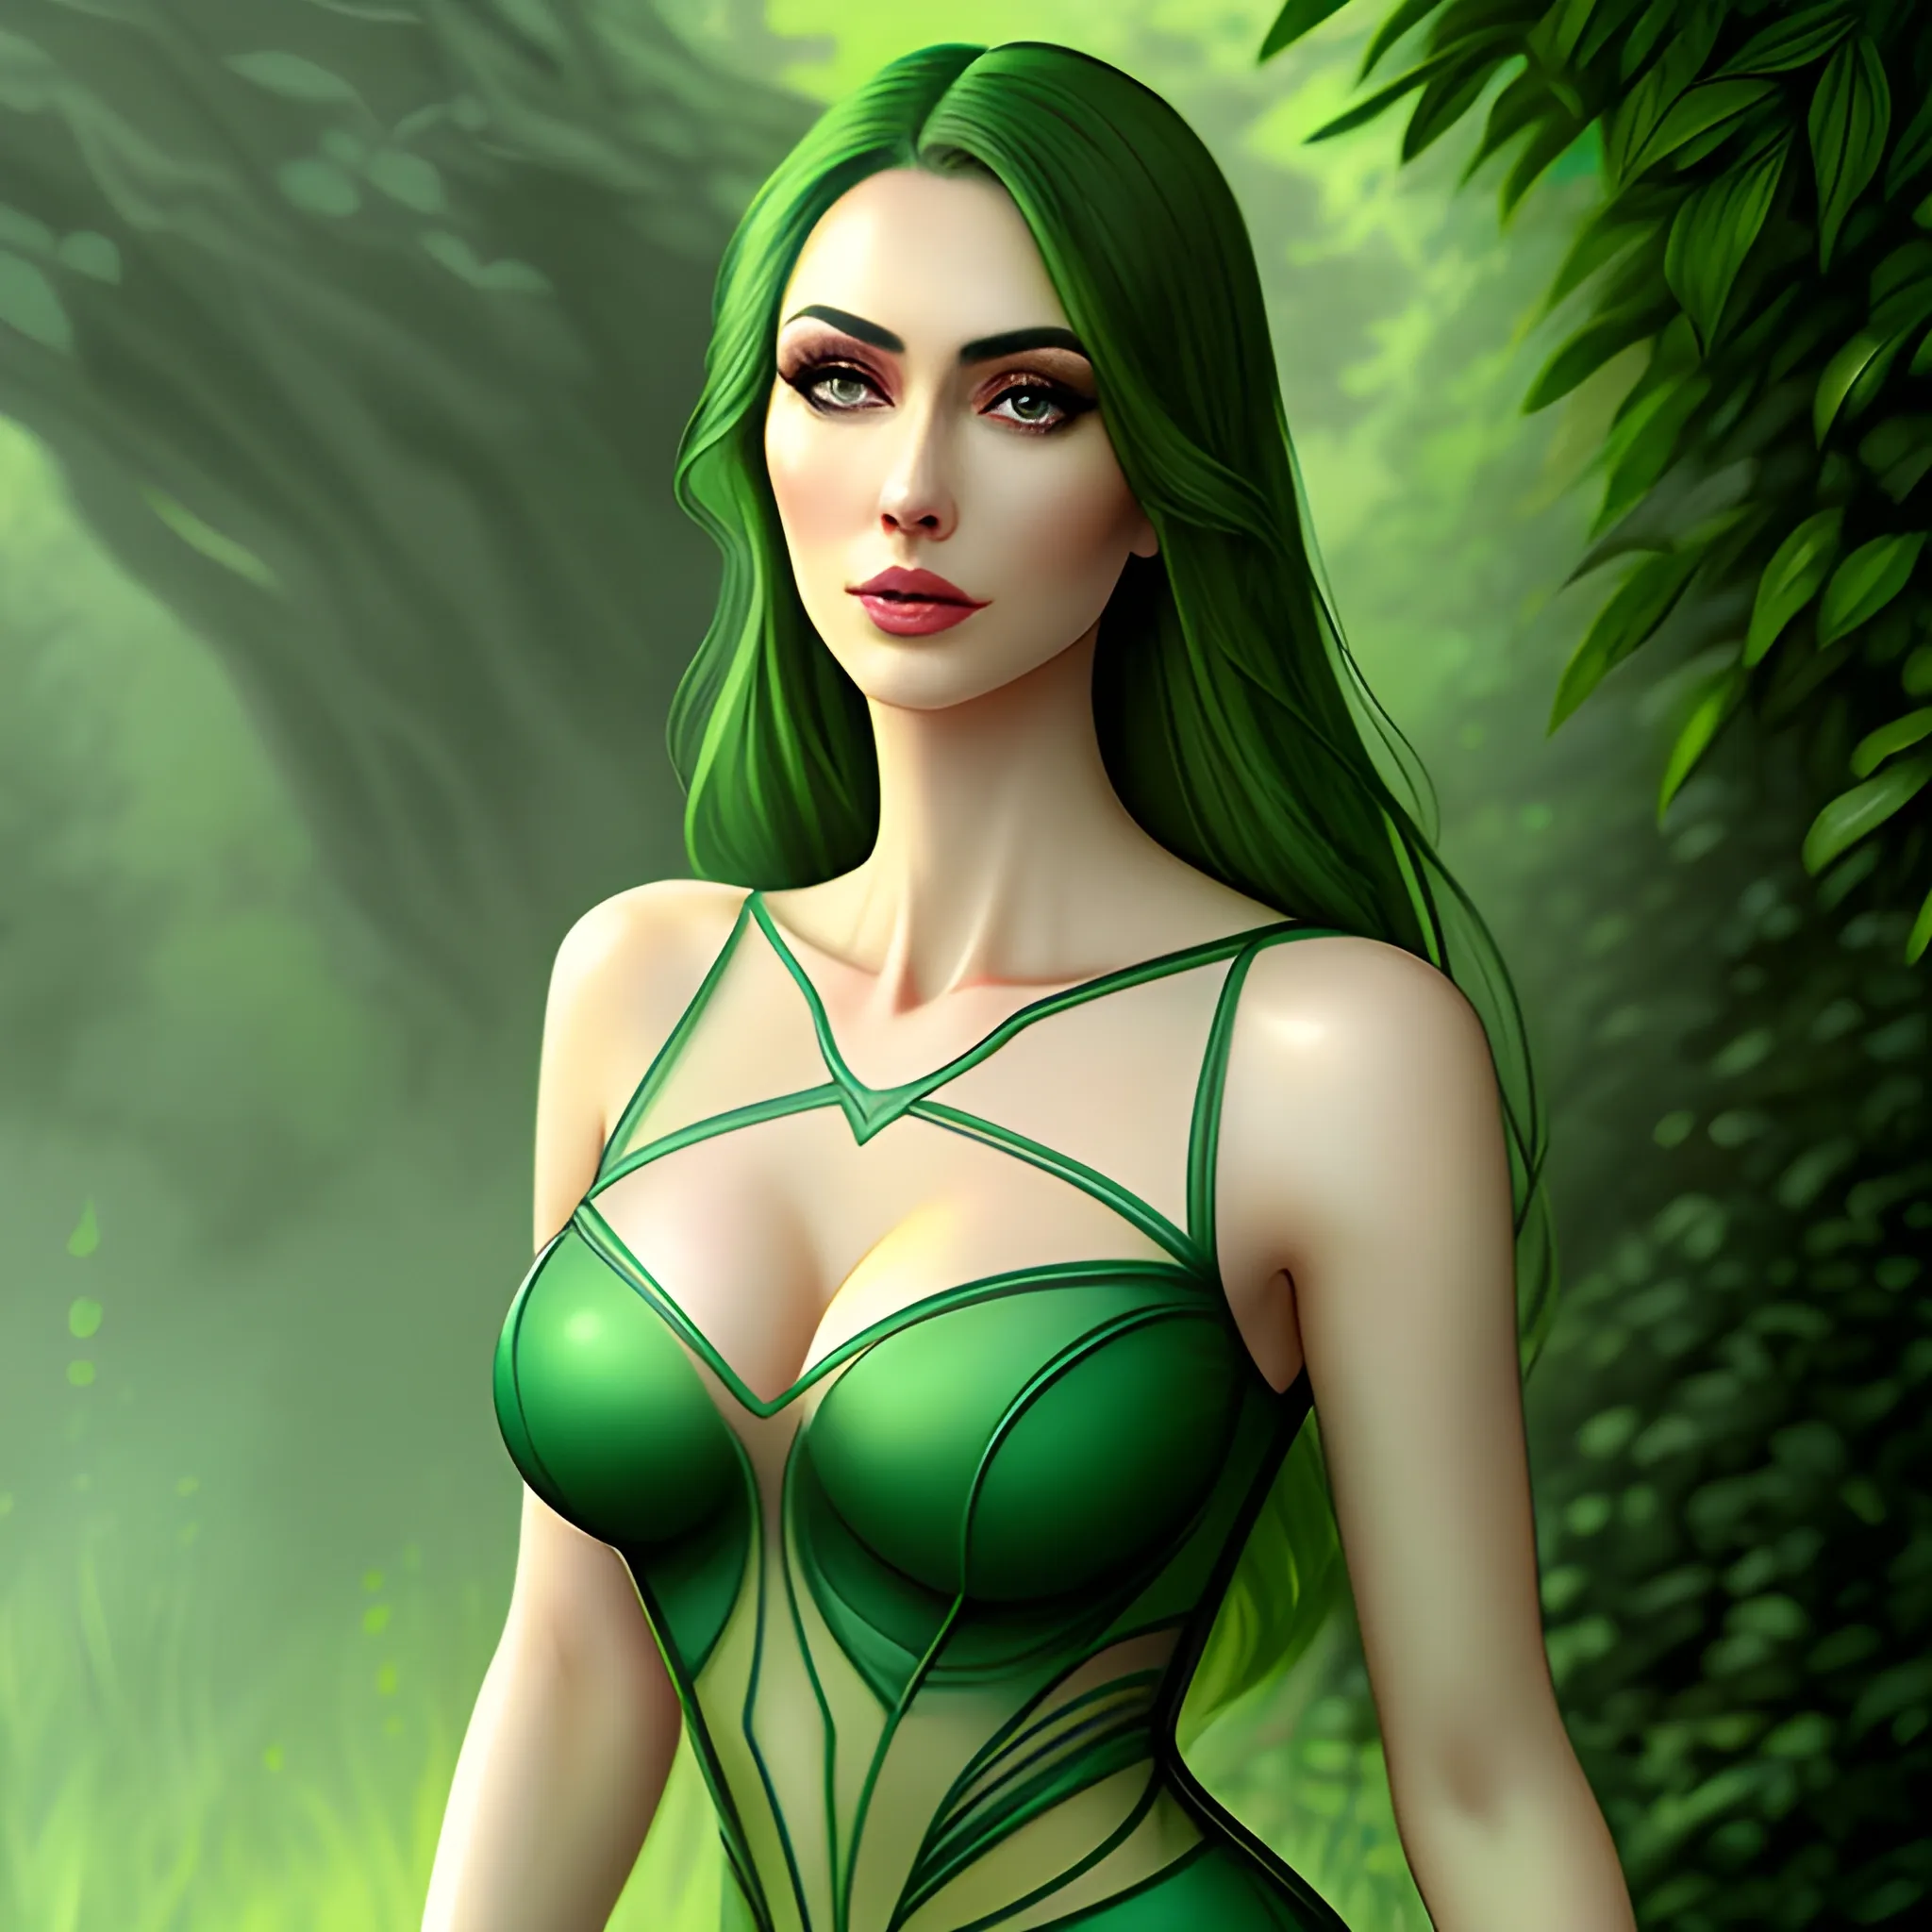 Beautiful girl with green eyes, high detail, green scene, hauntingly beautiful illustration, full body, 
transparent dress braless, realistic

